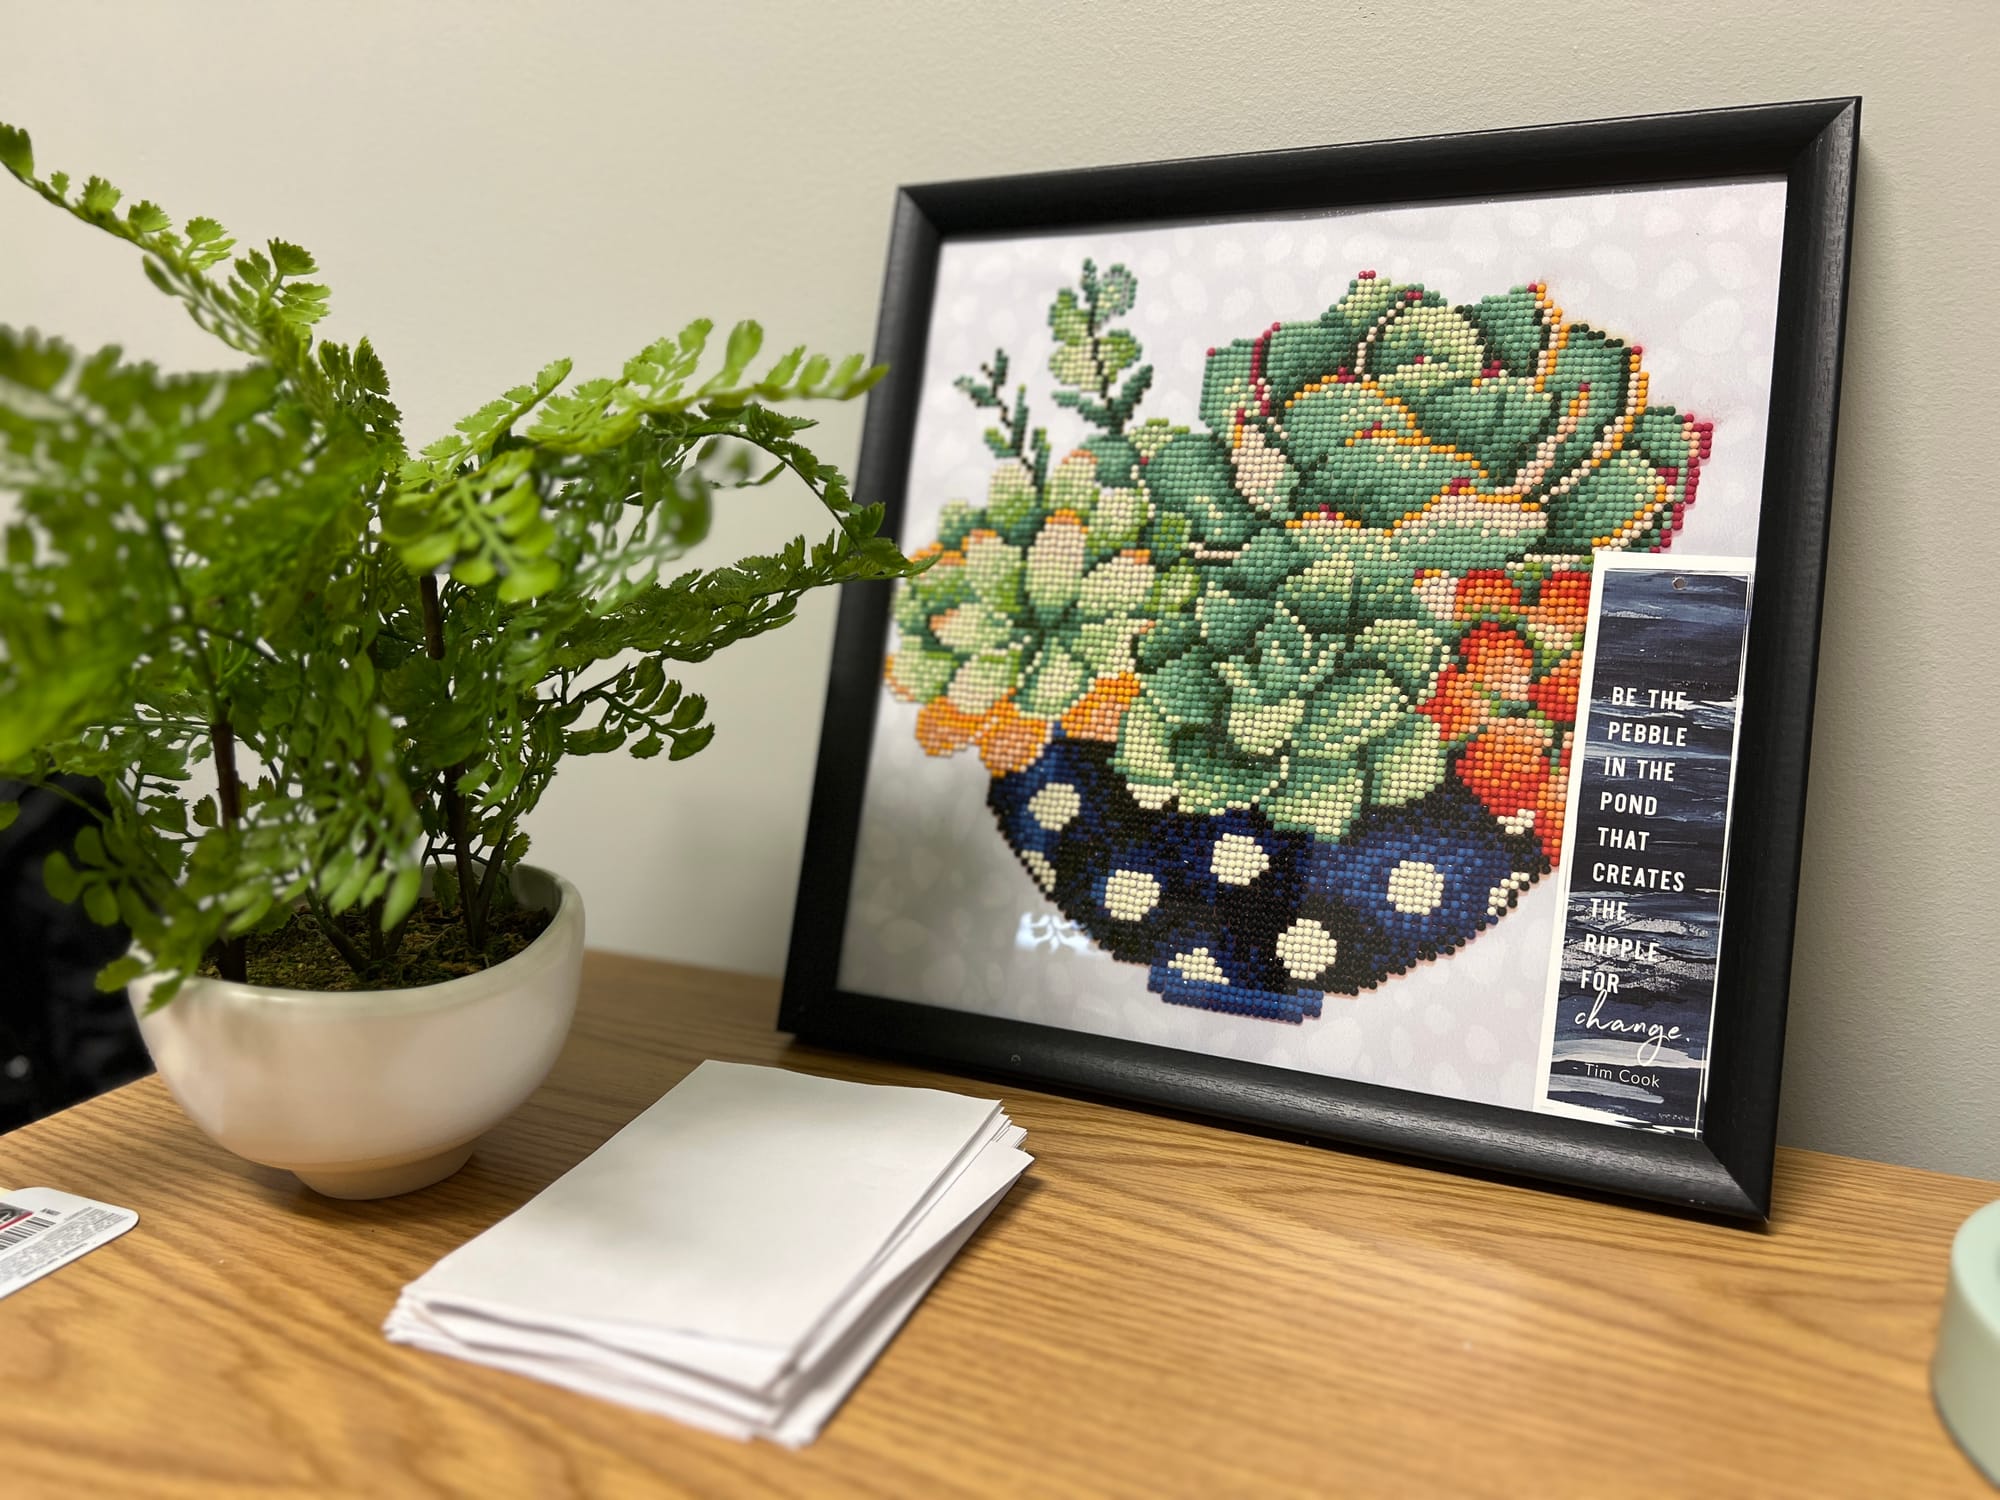 View of a plant and an image of a plant on a desk with an inspirational quote.